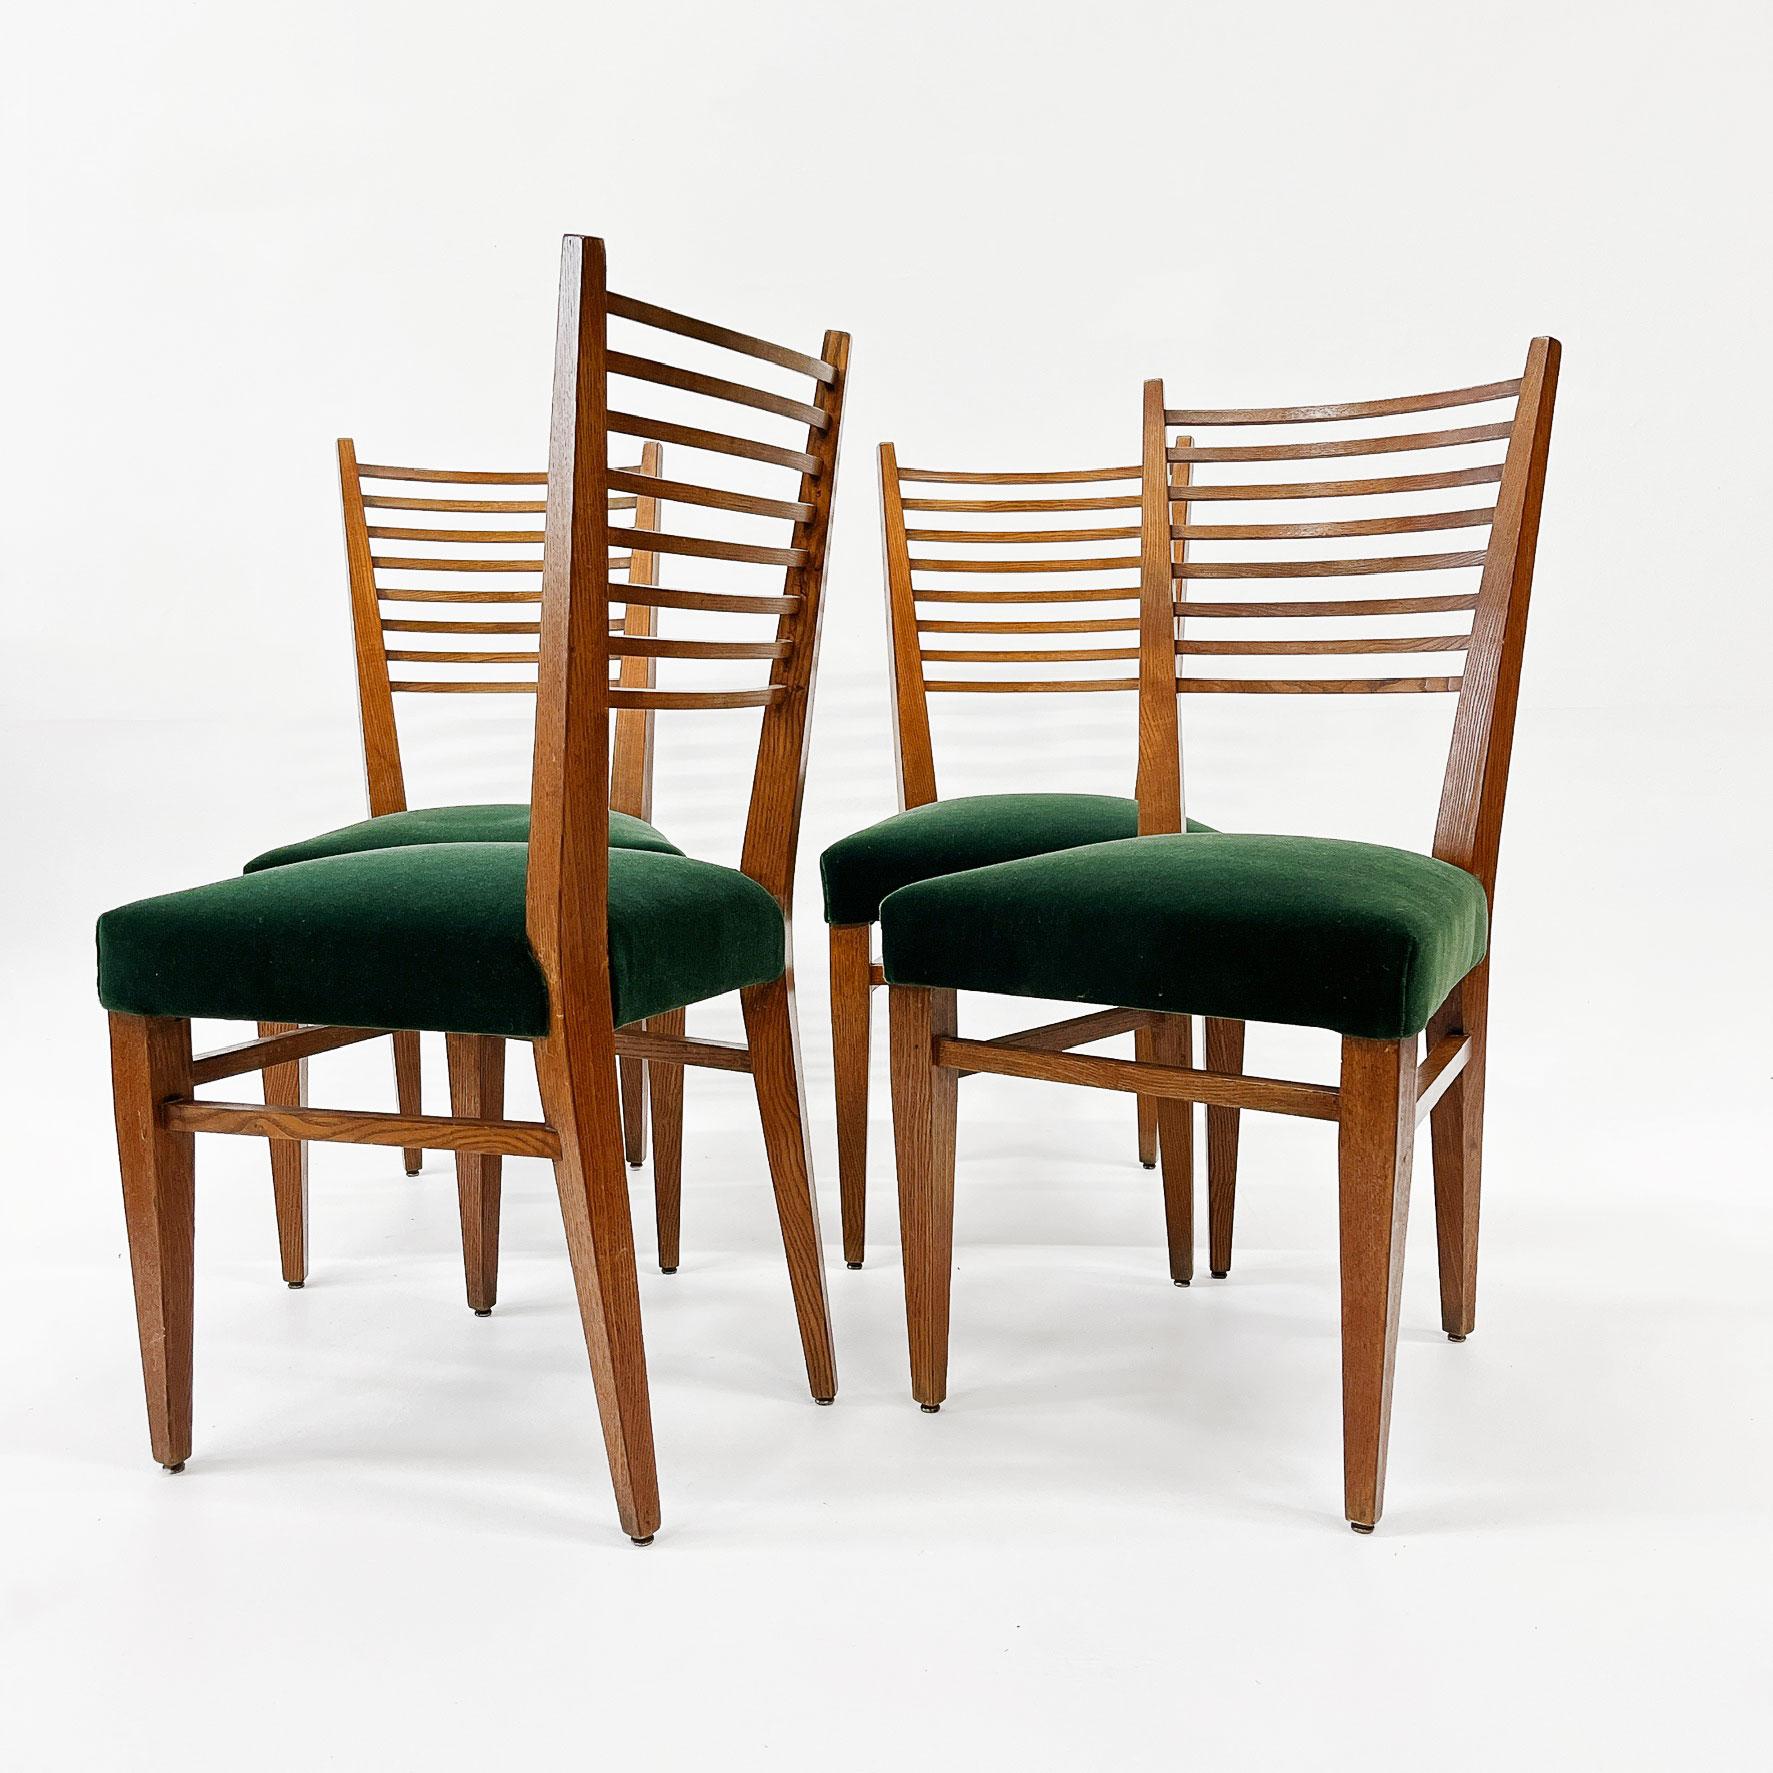 Set of four French ladder back oak chairs in the manner of Gio Ponti having reupholstered seat in a beautiful emerald green Mohair, circa 1950s.